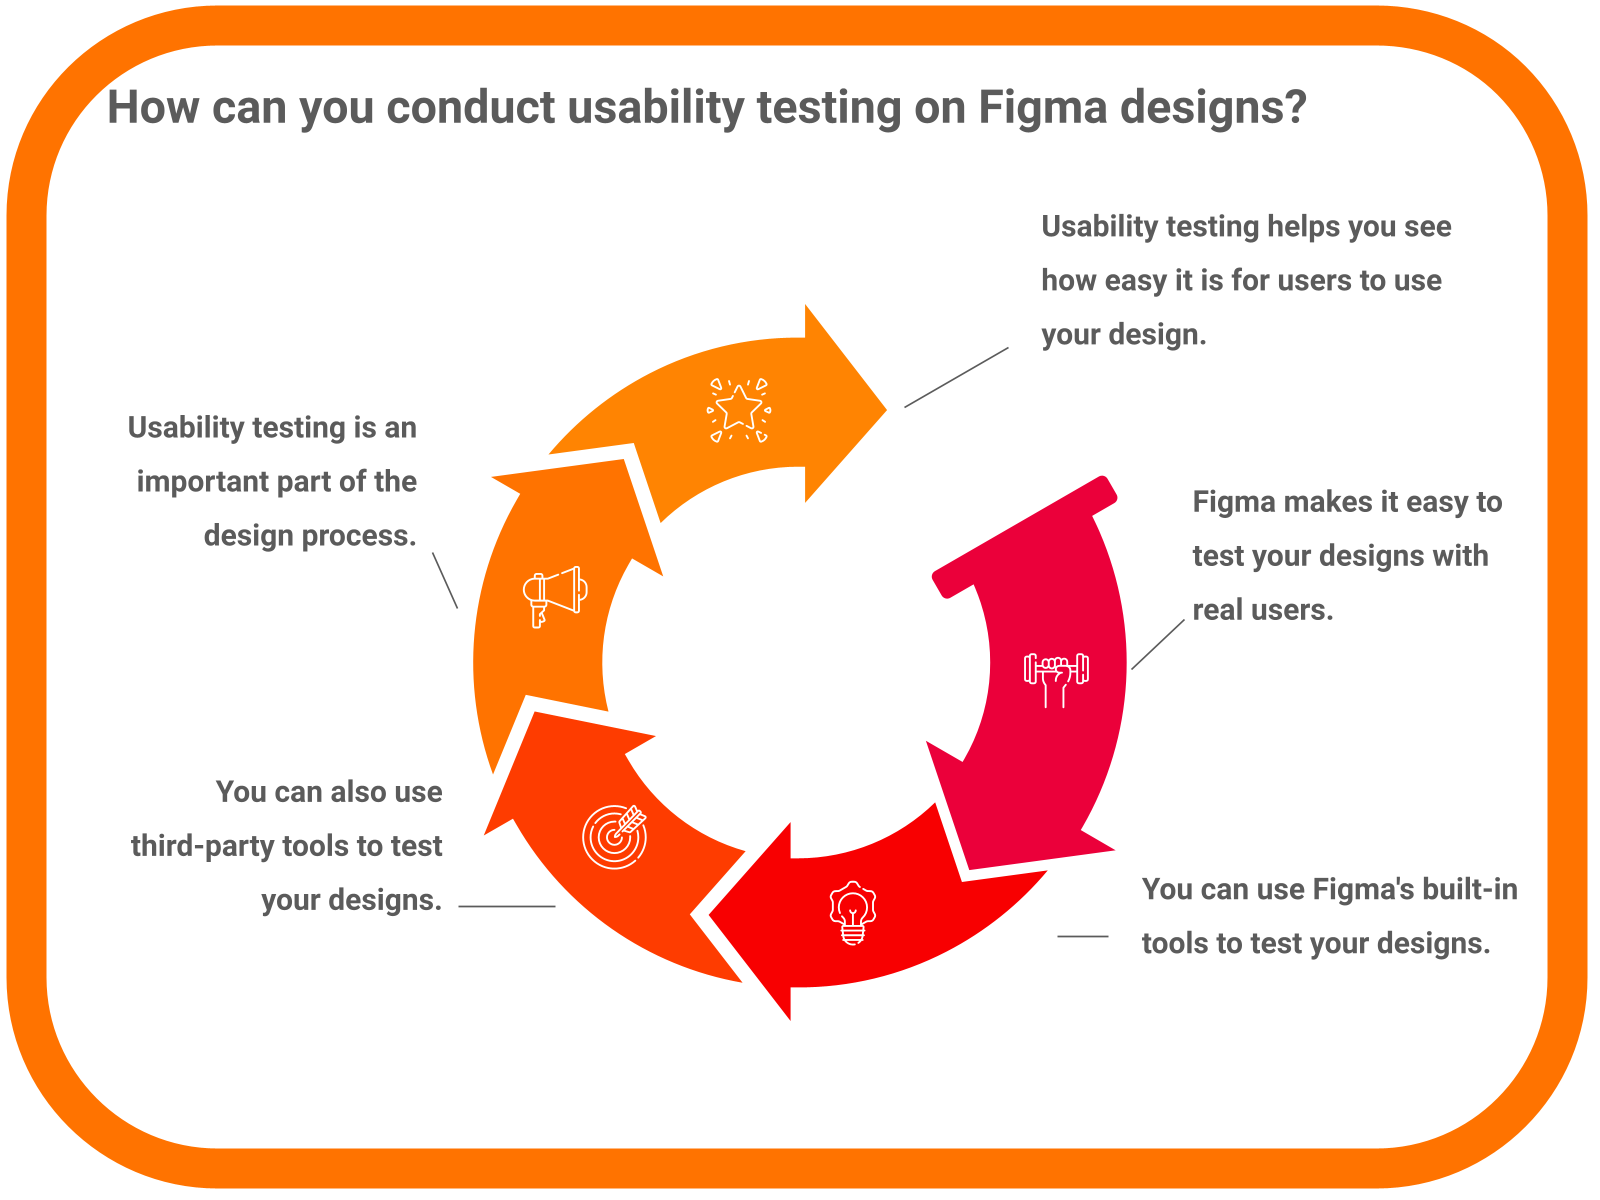 Why conduct usability testing on Figma designs?